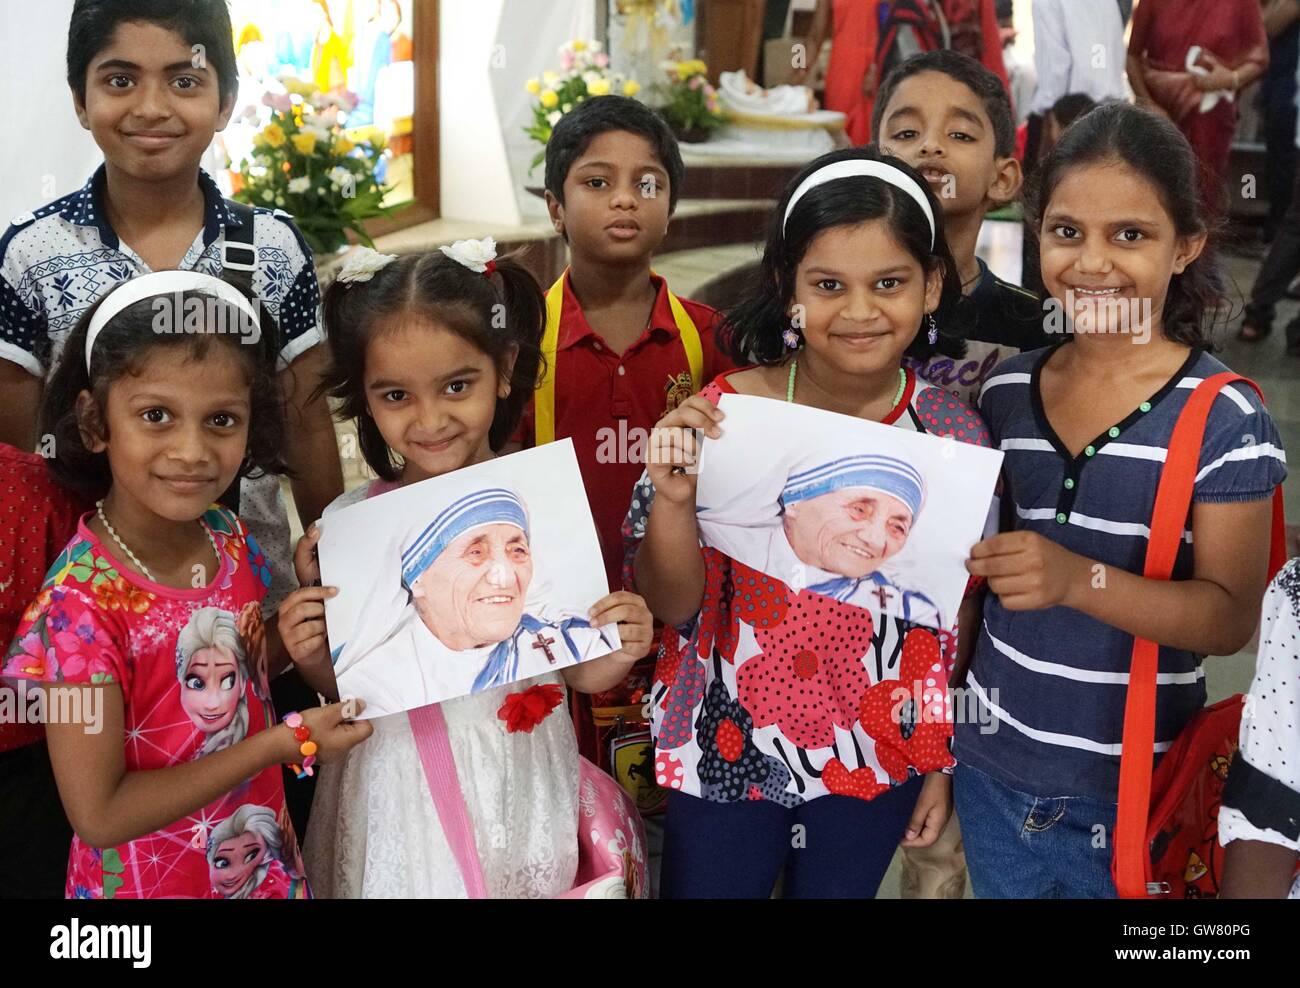 Children display images of Mother Teresa at the Fatima Church in Mumbai, India on September 4, 2016 Stock Photo